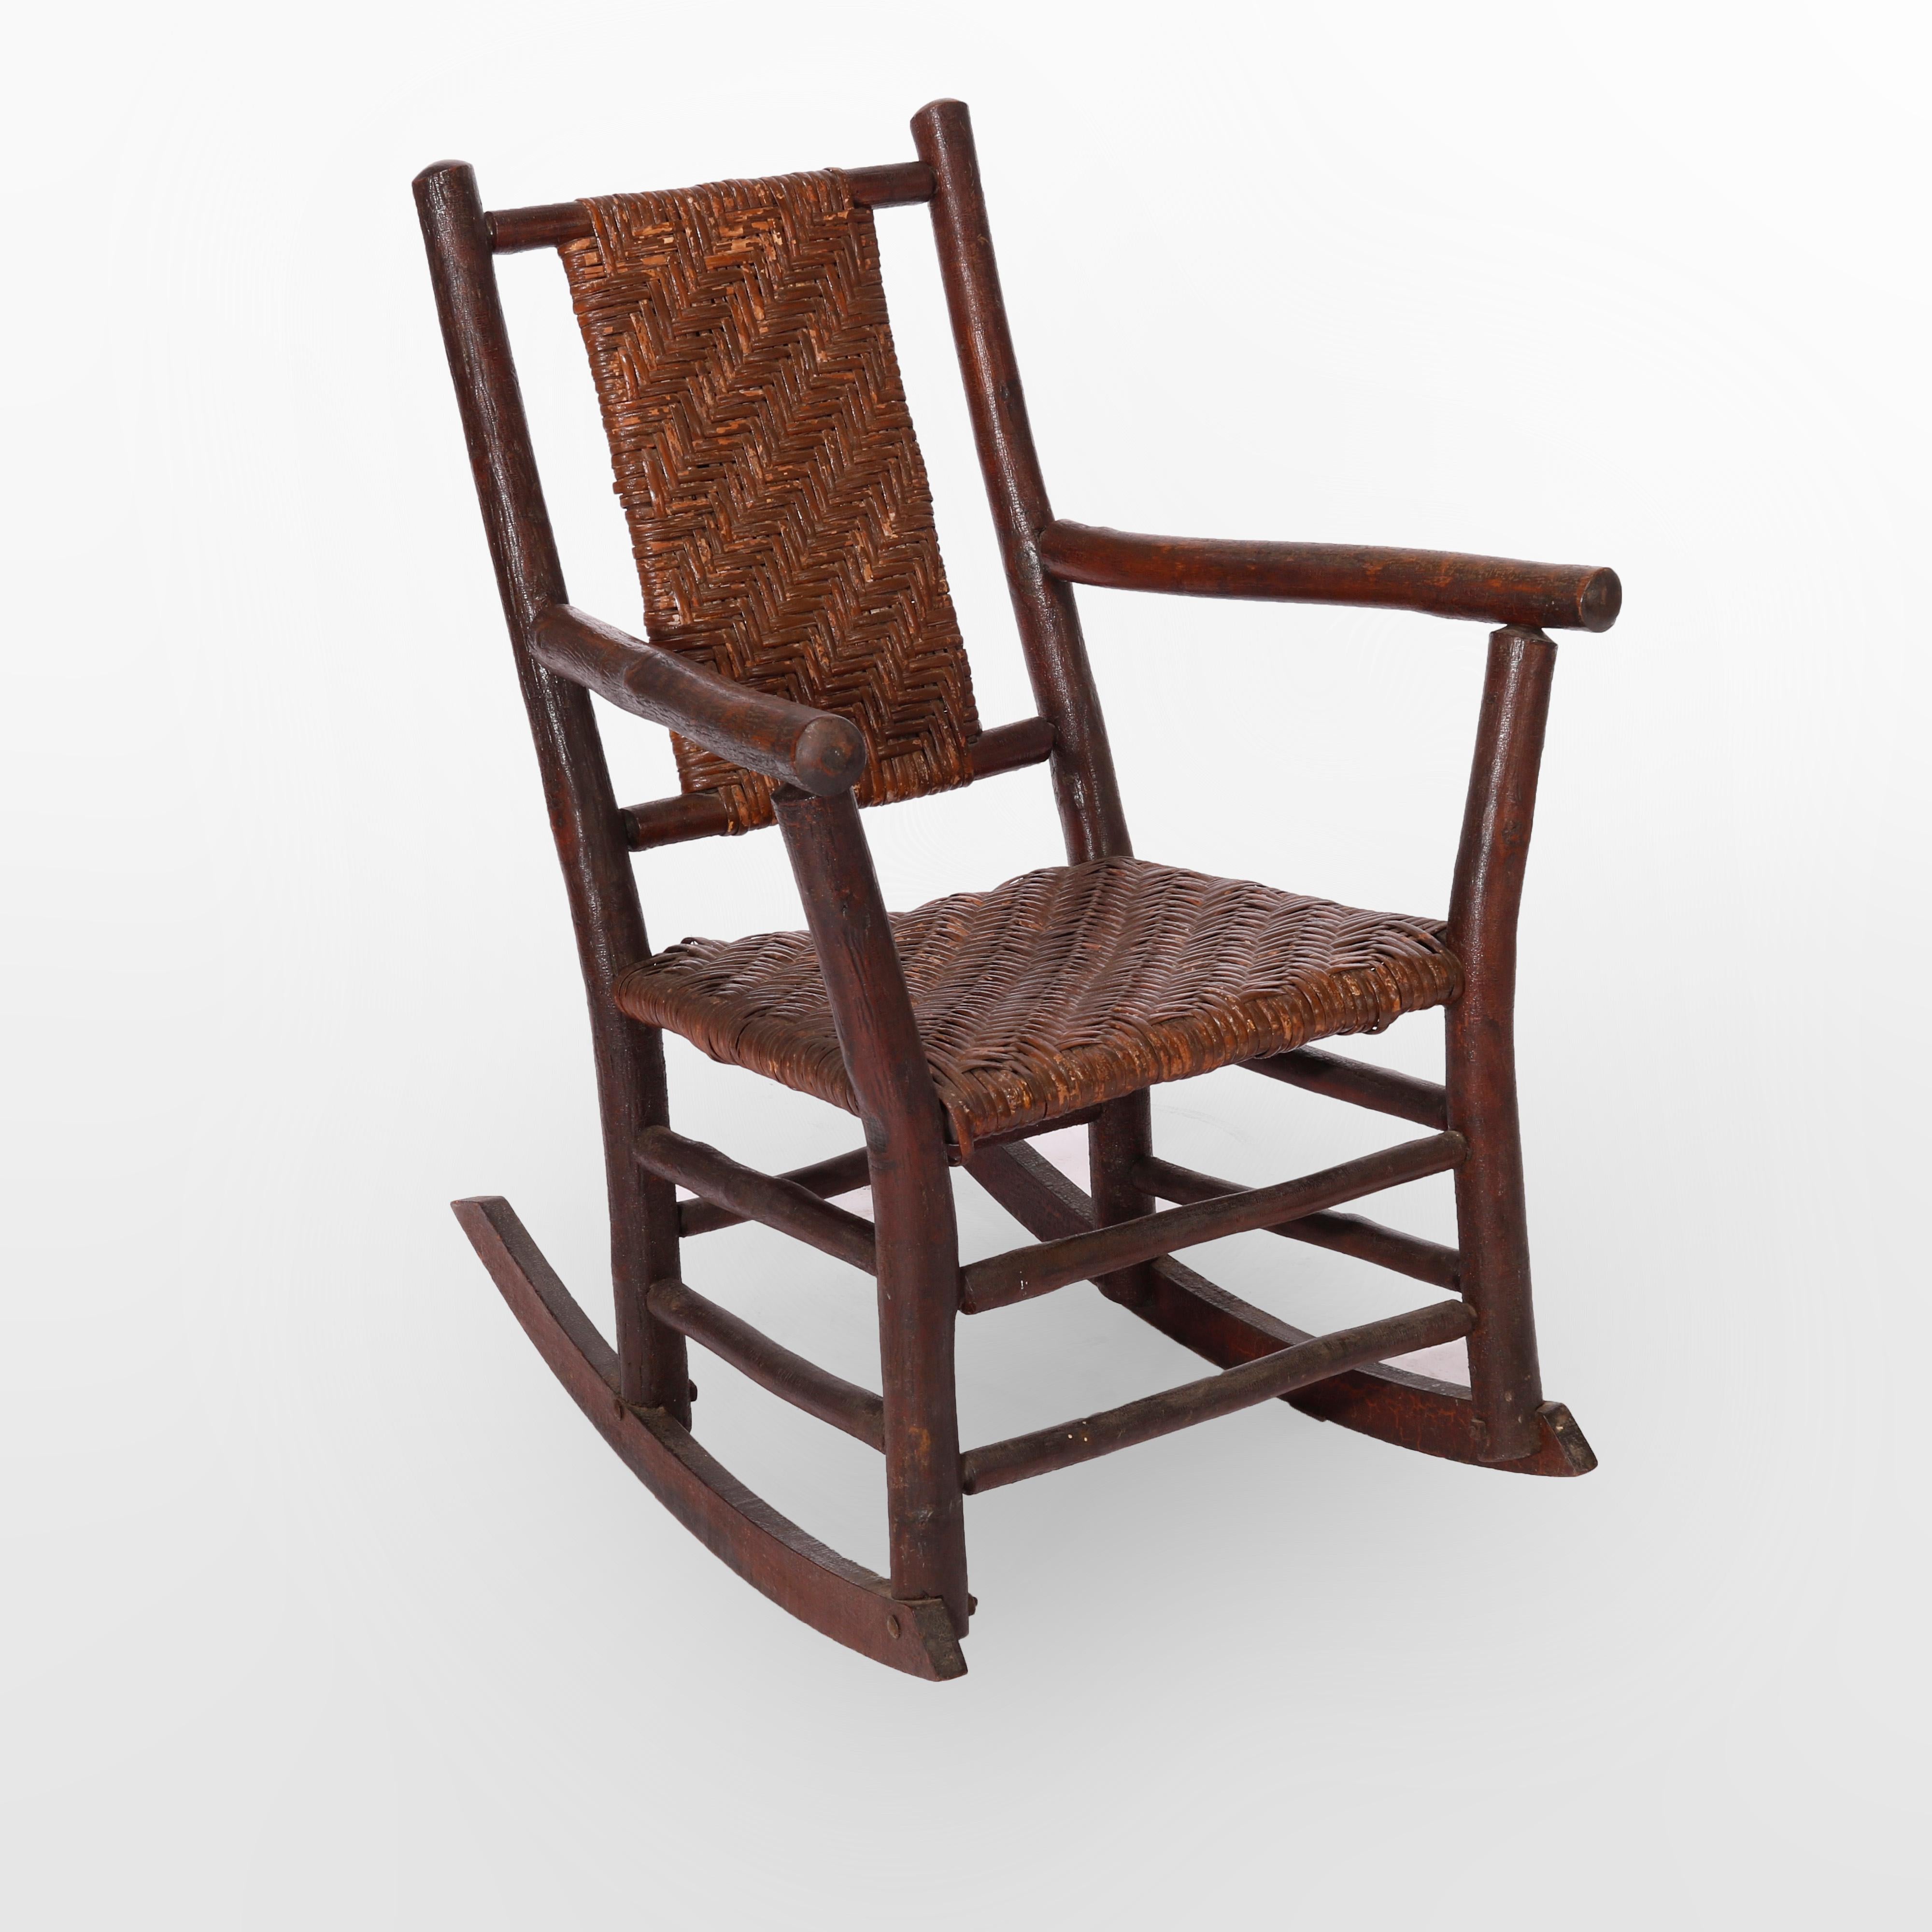 An antique Adirondack rocking chair by Old Hickory offers stick construction in form with reeded seat and back, maker signed, c 1910

Measures - 34.5''H x 25''W x 30''D.